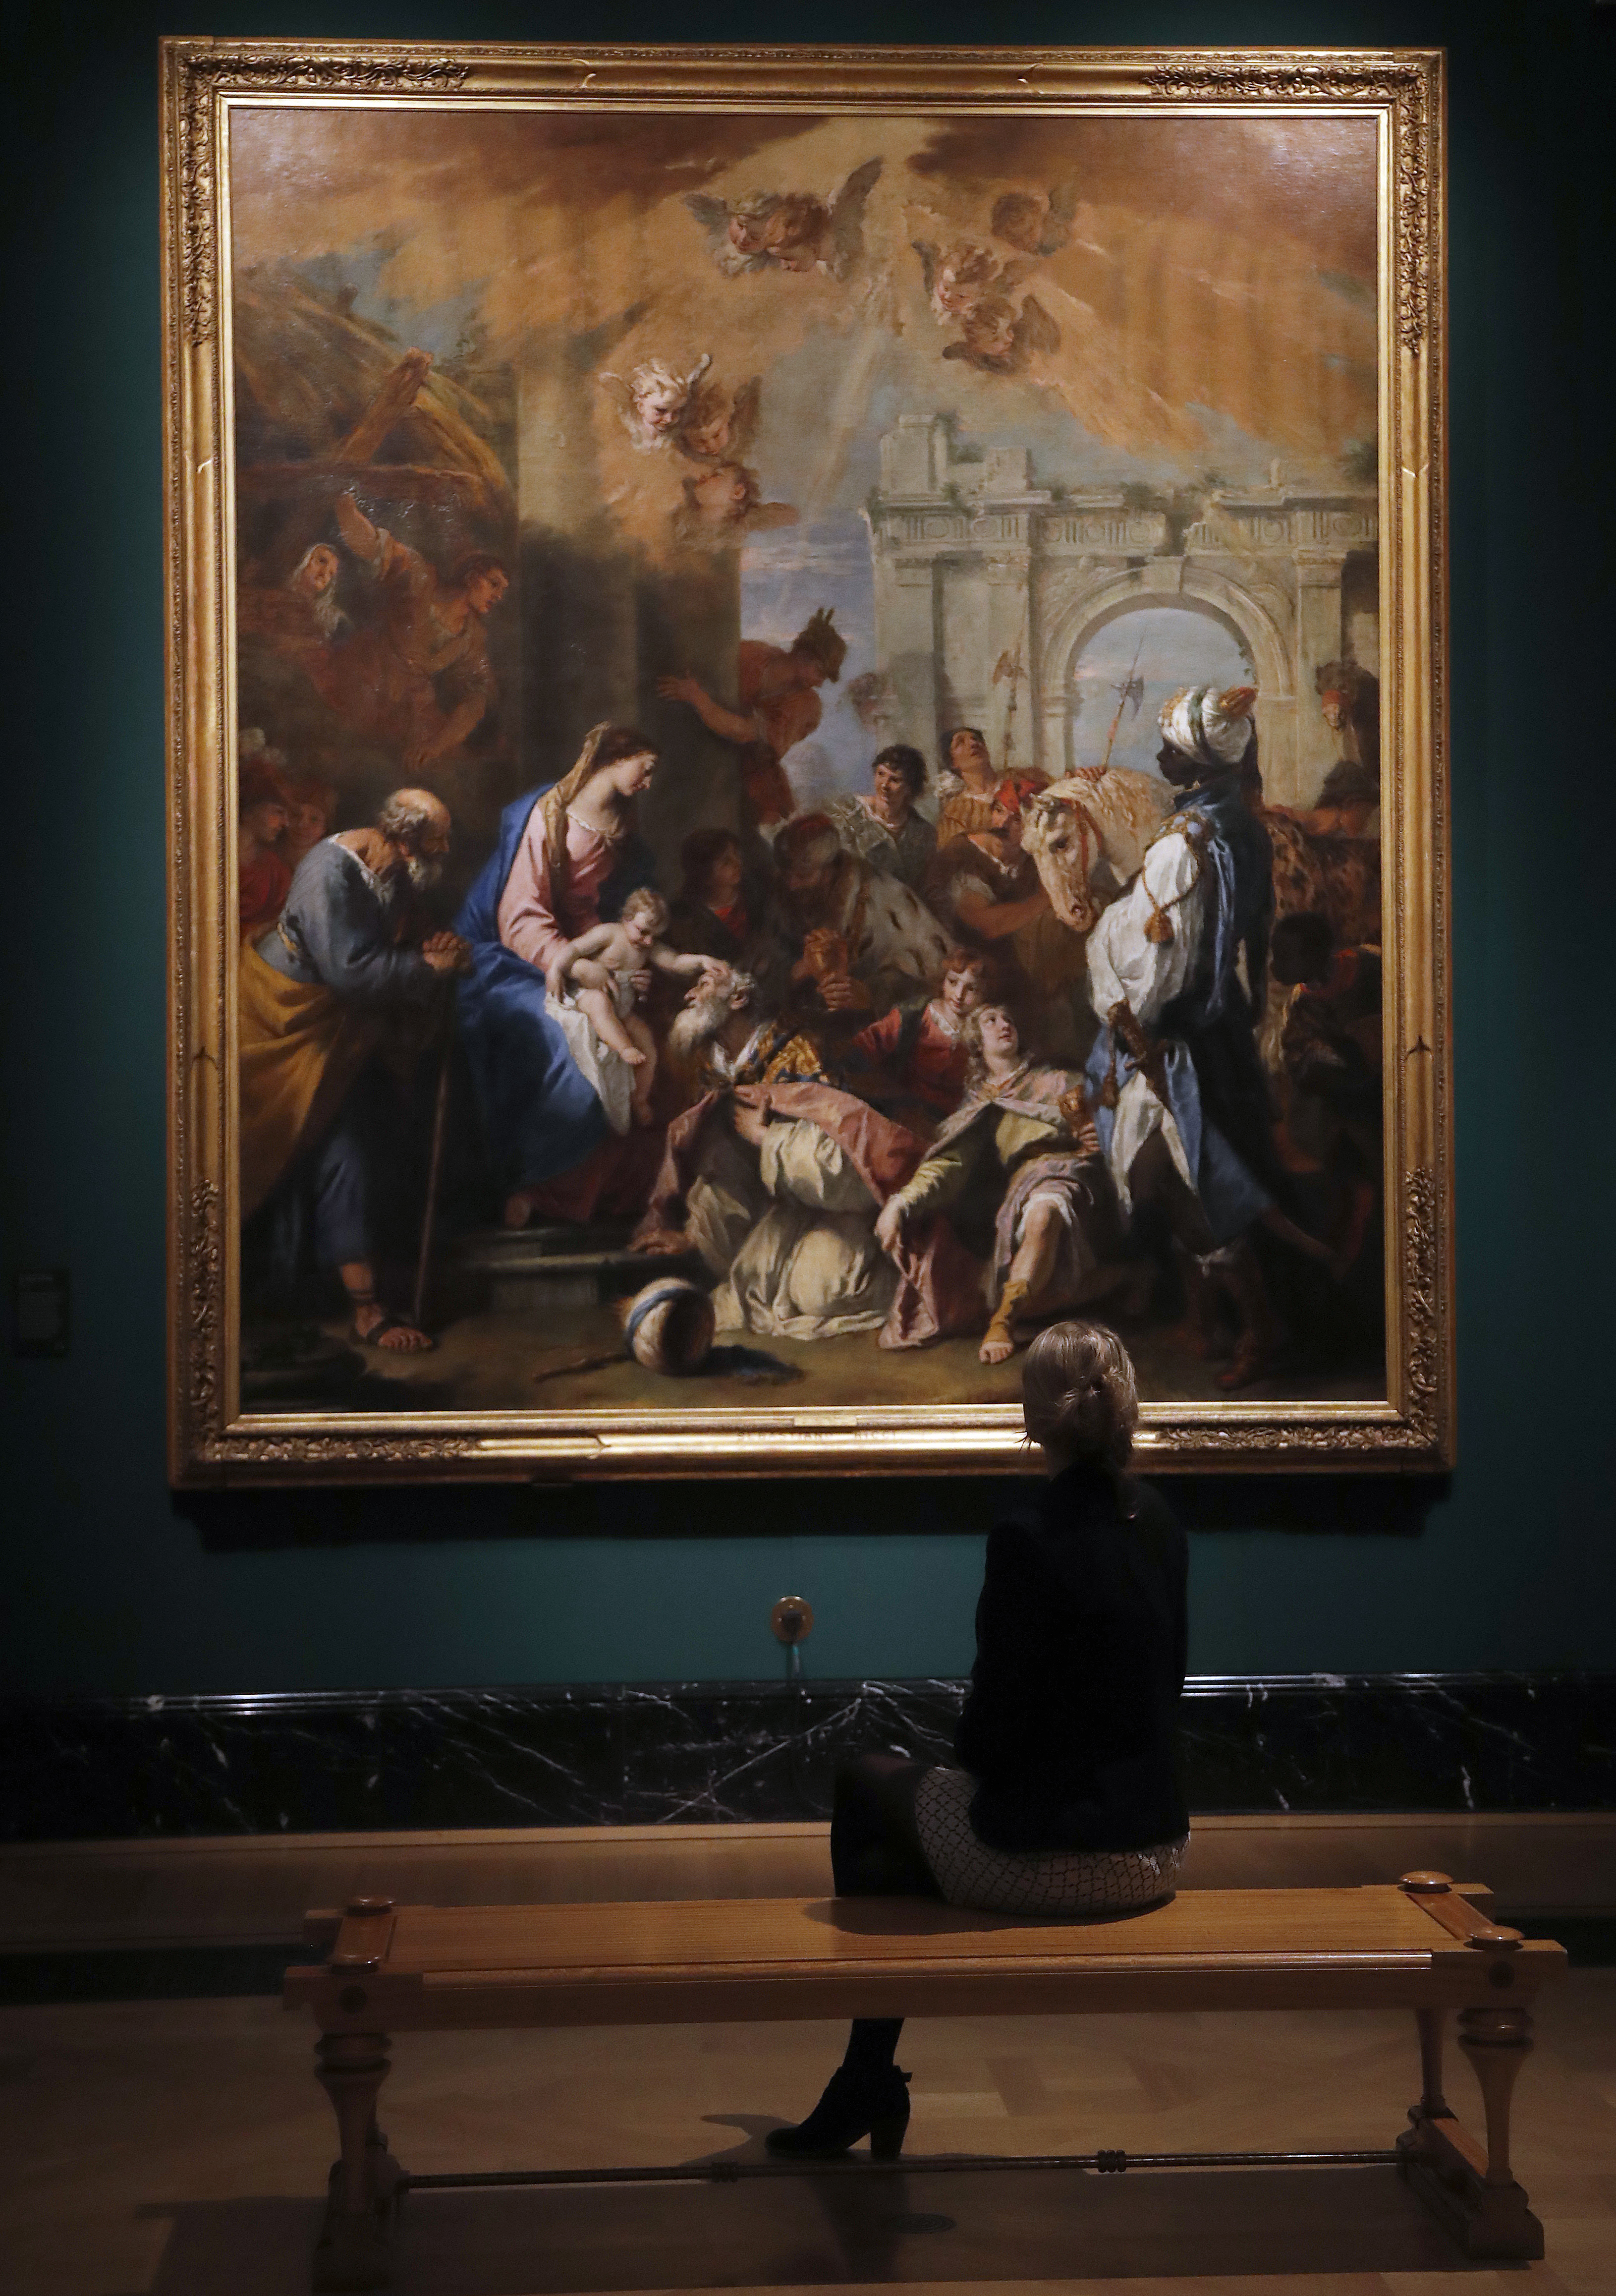 A woman sat down to look at the painting 'The Adoration of the Kings' by Sebastiano Ricci at the Queen's Gallery at Buckingham Palace in London, Thursday, May 18, 2017. A new exhibition reunites two of Canaletto's finest sets of paintings, displayed side by side for the first time in almost 40 years. Canaletto & the Art of Venice is opening on May 19, at The Queen's Gallery, Buckingham Palace. (AP Photo/Frank Augstein)